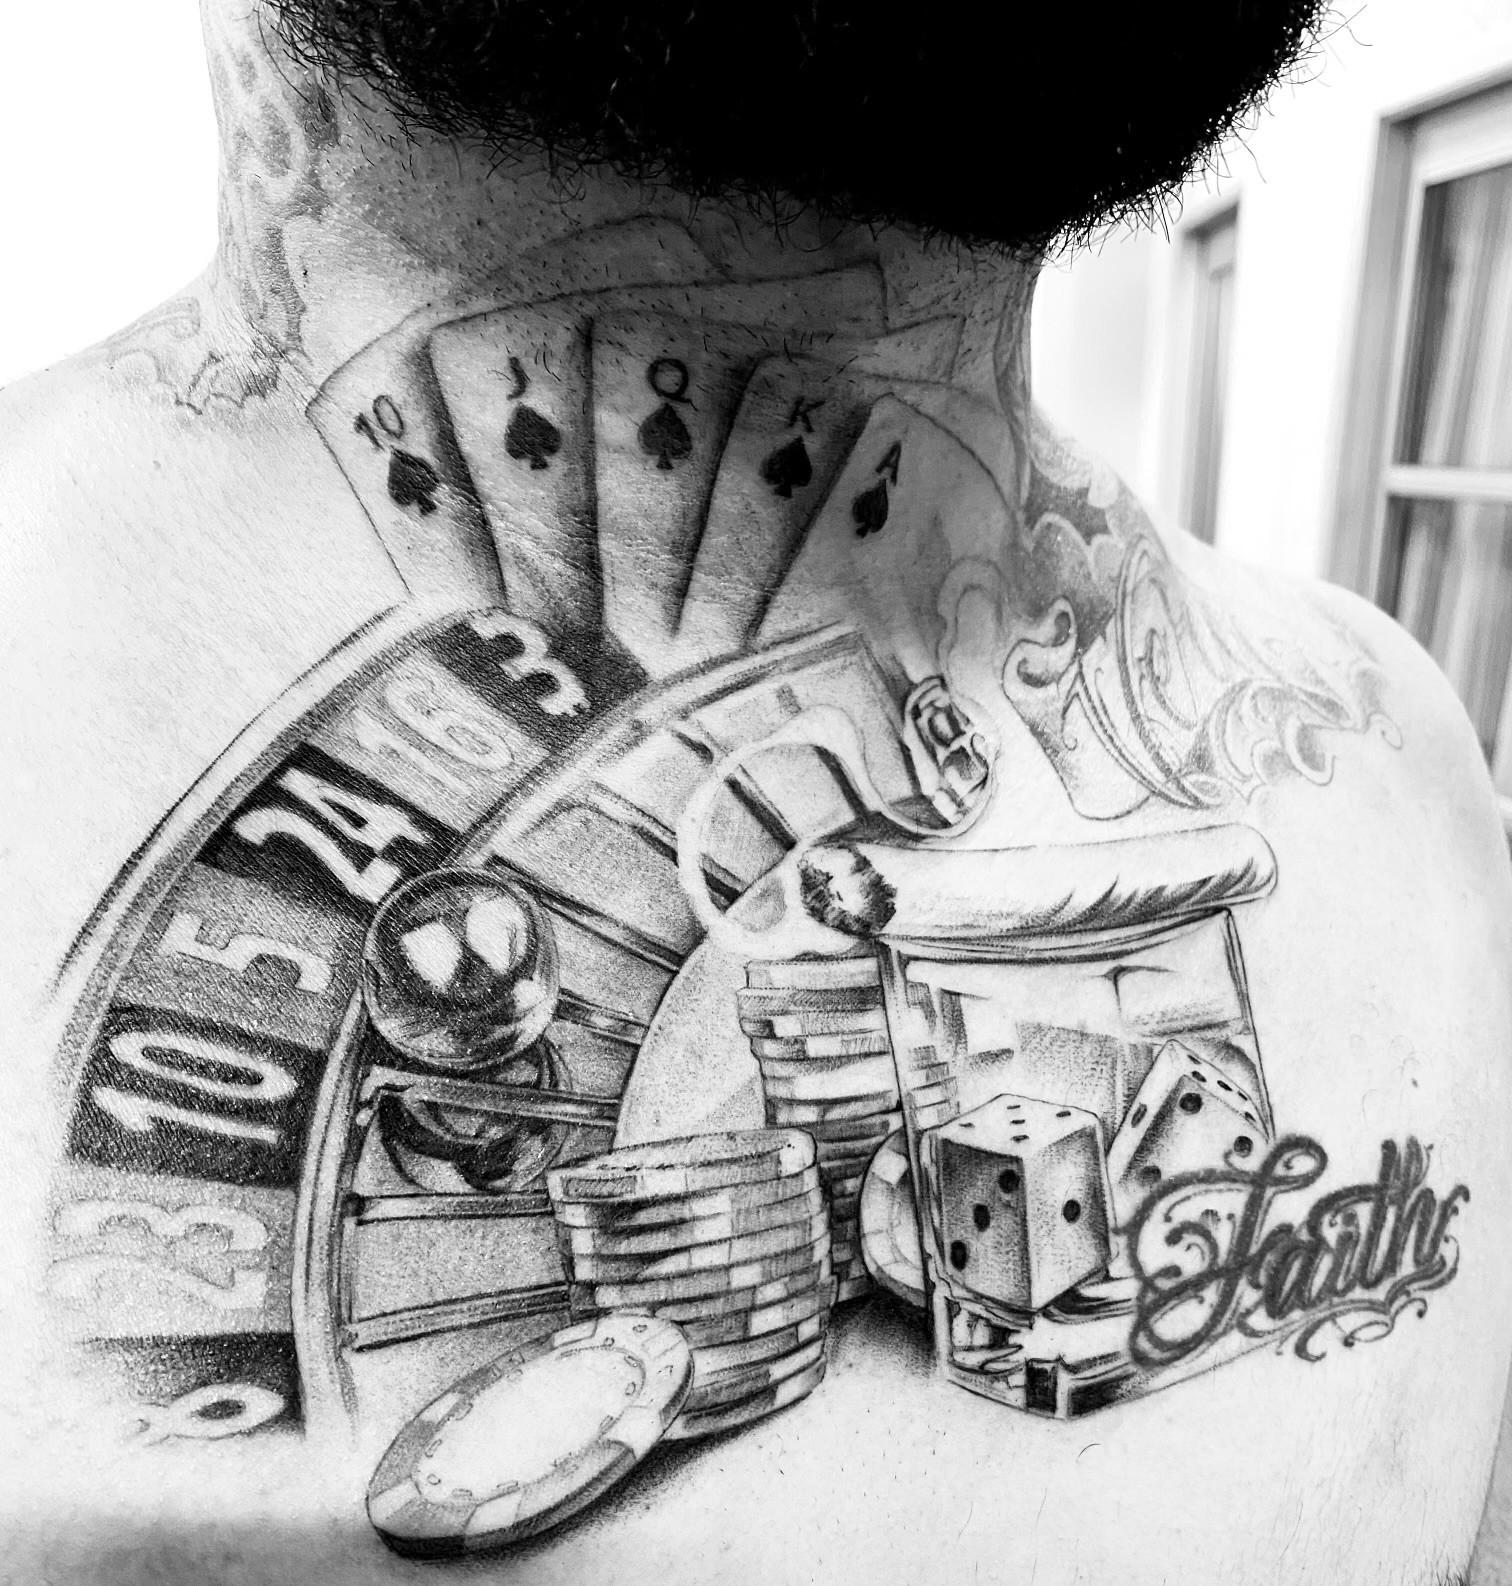 LV Tattoo - This customer made his own luck in 2020! #tattooartist #tattoos  #lasvegas #gamble #poker #chips #lucky #luck #stack #colorful #100 #love |  Facebook